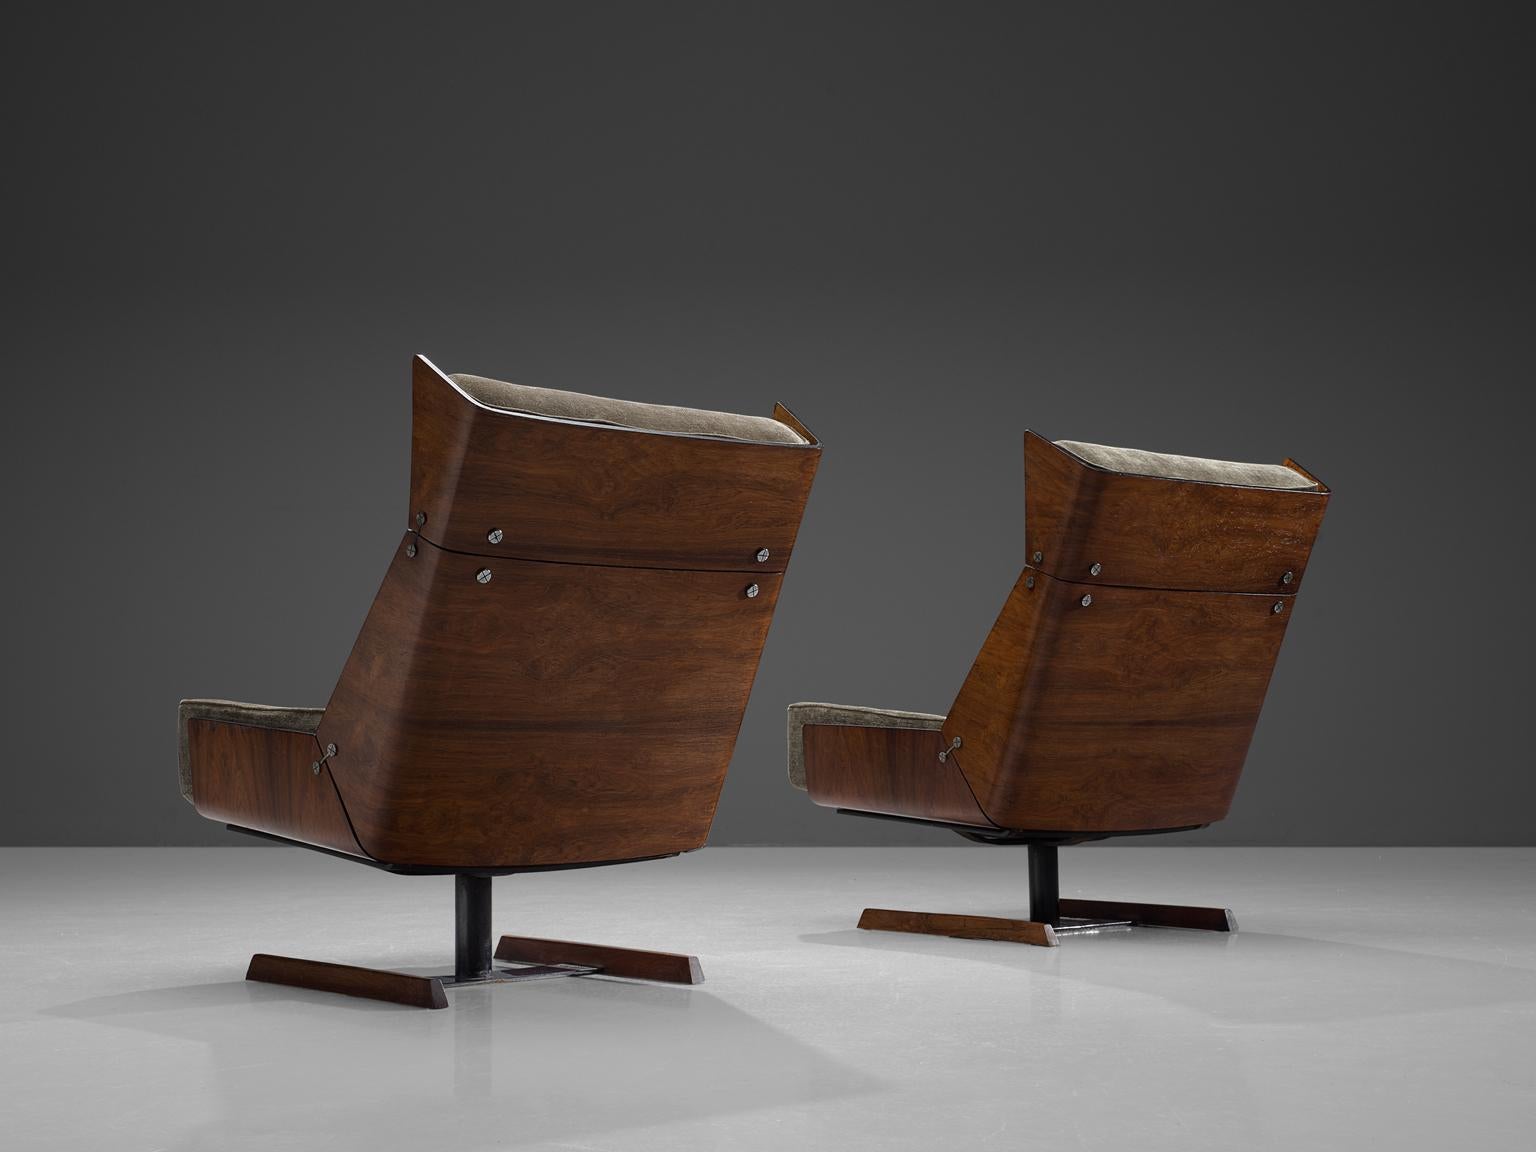 Pair of lounge chairs, in rosewood, metal and velvet, Brazil, 1960s.

Three shells, which consist of bended rosewood plywood, are combined by metal elements that connect the shells with each other. Exceptional are the sled or slipper legs in metal